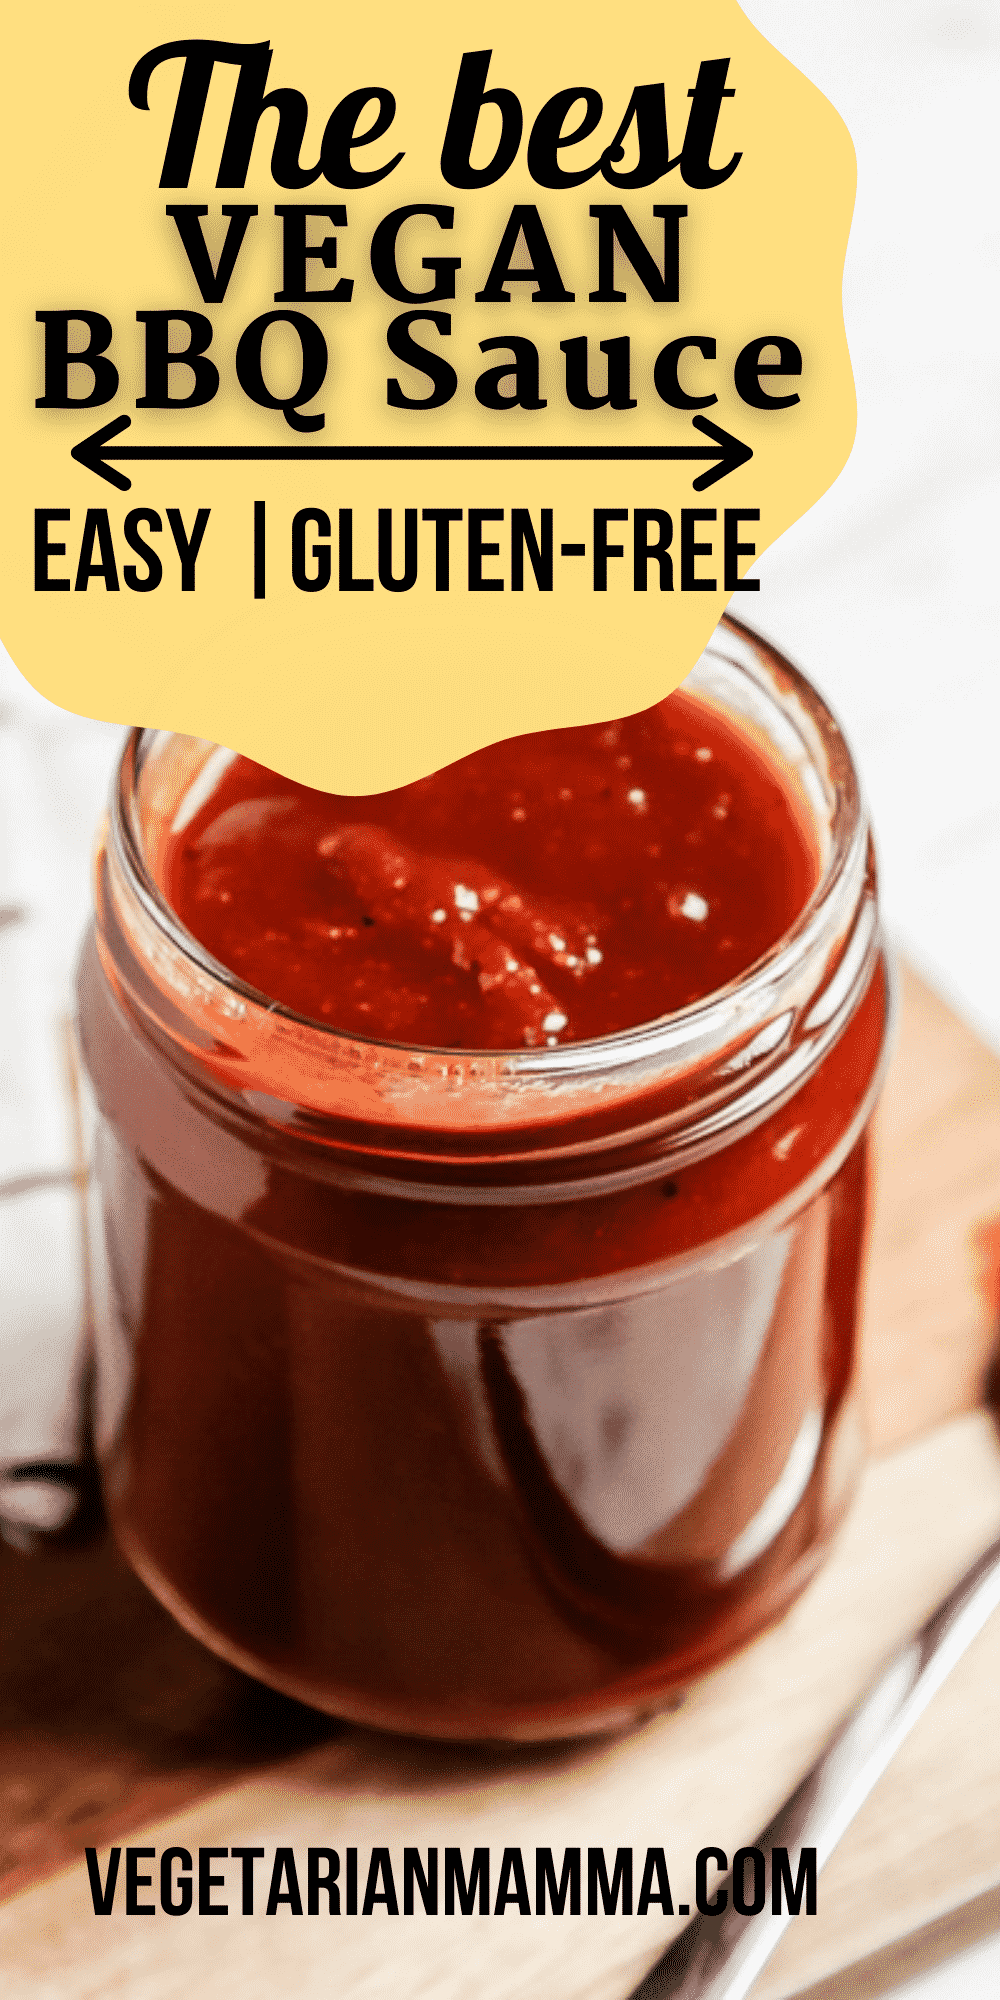 Make your own Vegan BBQ Sauce at home! It's perfectly tangy with a hint of smokiness for the best barbecue sauce you'll ever make. #vegansauce #glutenfreebbqsauce